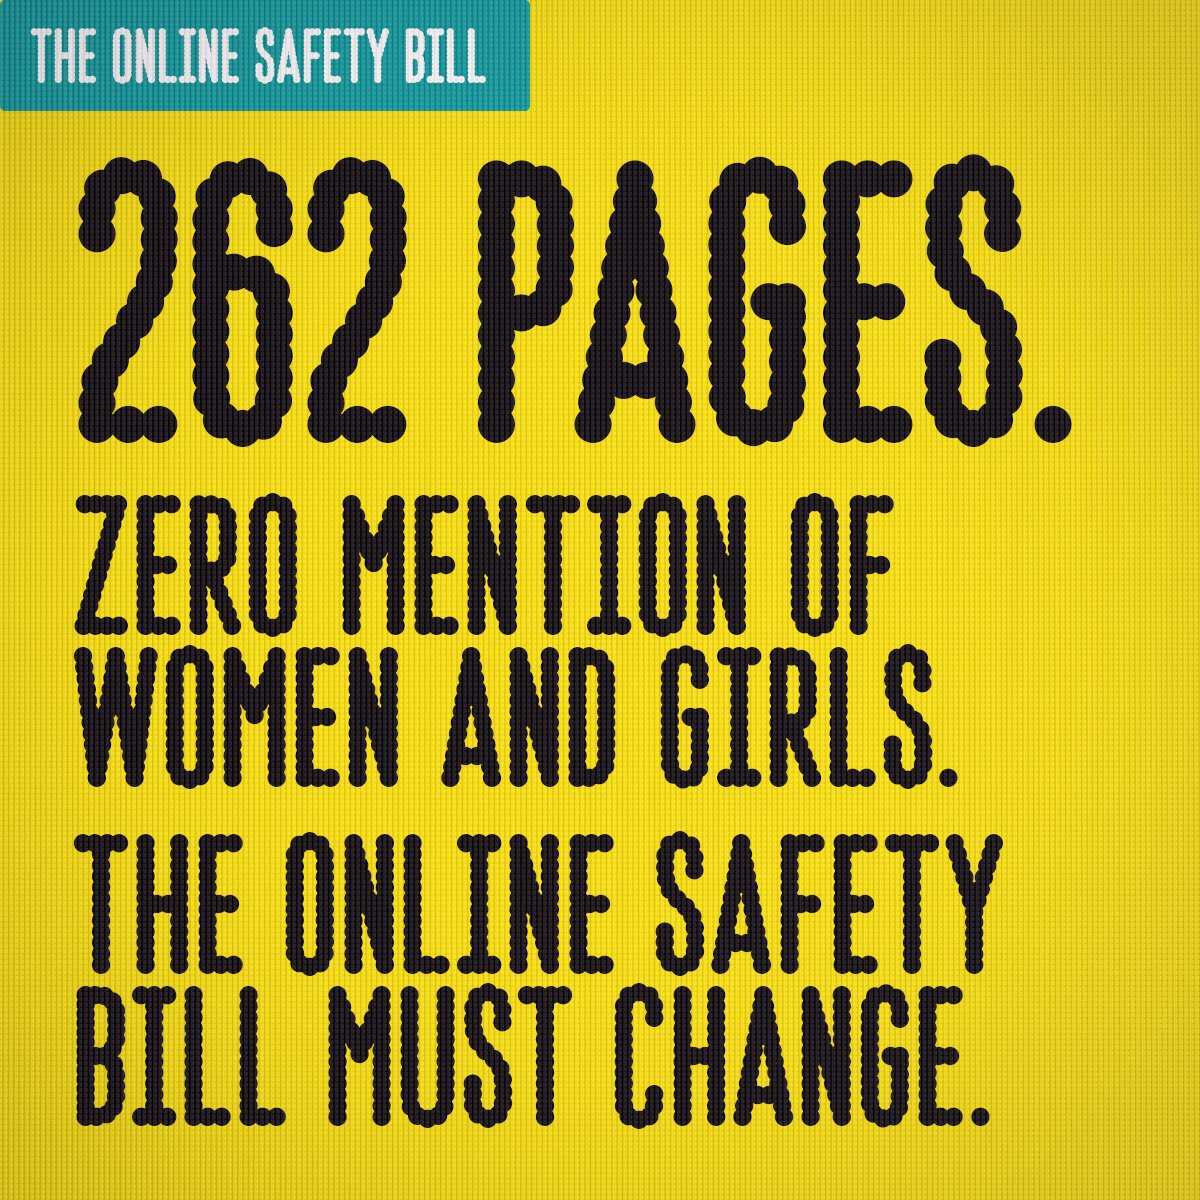 The #OnlineSafetyBill was designed to make the internet safer. But if women and girls are to be protected from abuse online, it must be amended!   

Time's running out - help #MakeItSafer for women and girls online. Visit ee.co.uk/hopeunited to find out how